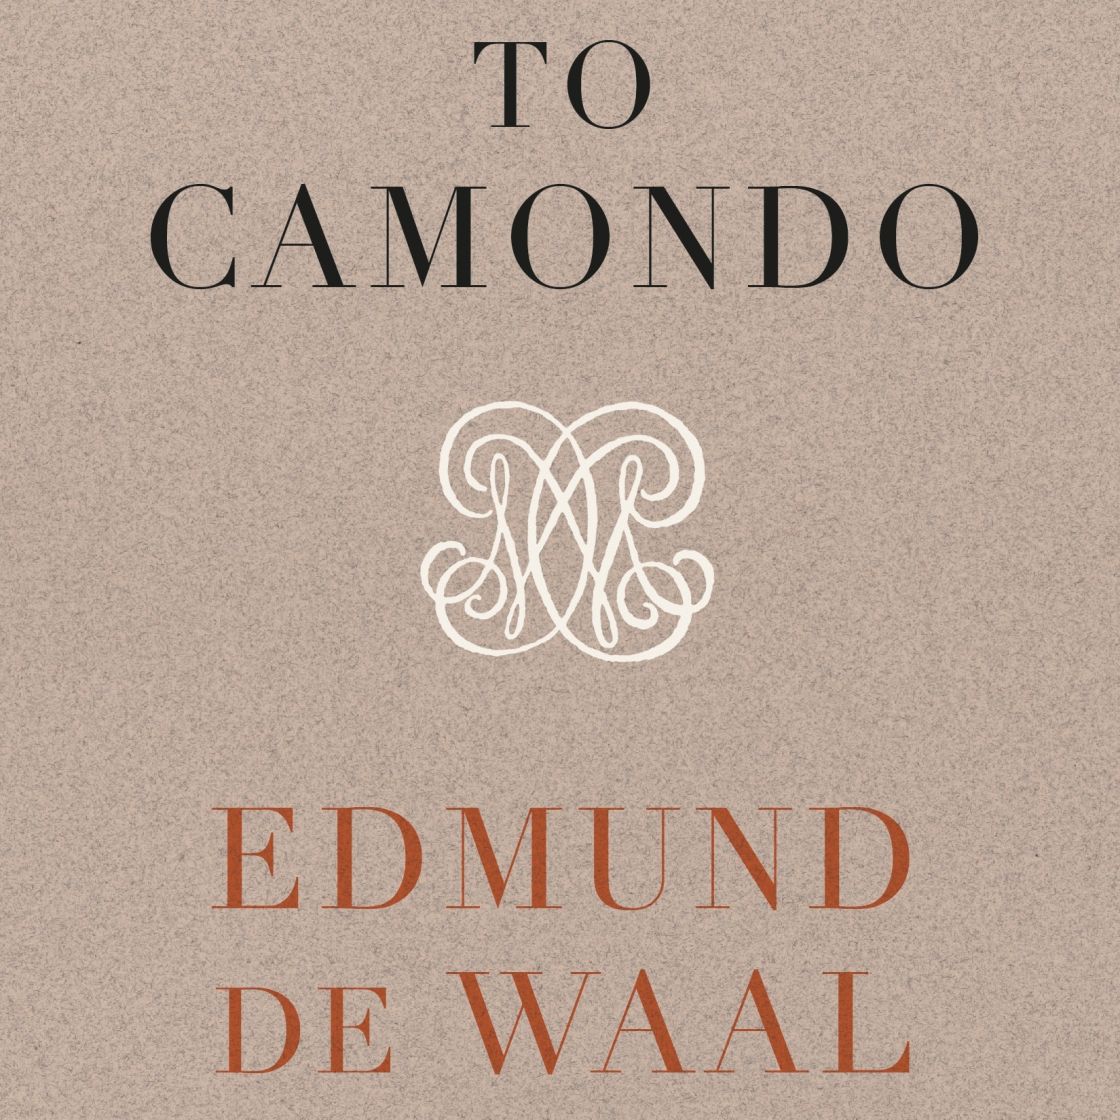 LETTERS TO CAMONDO